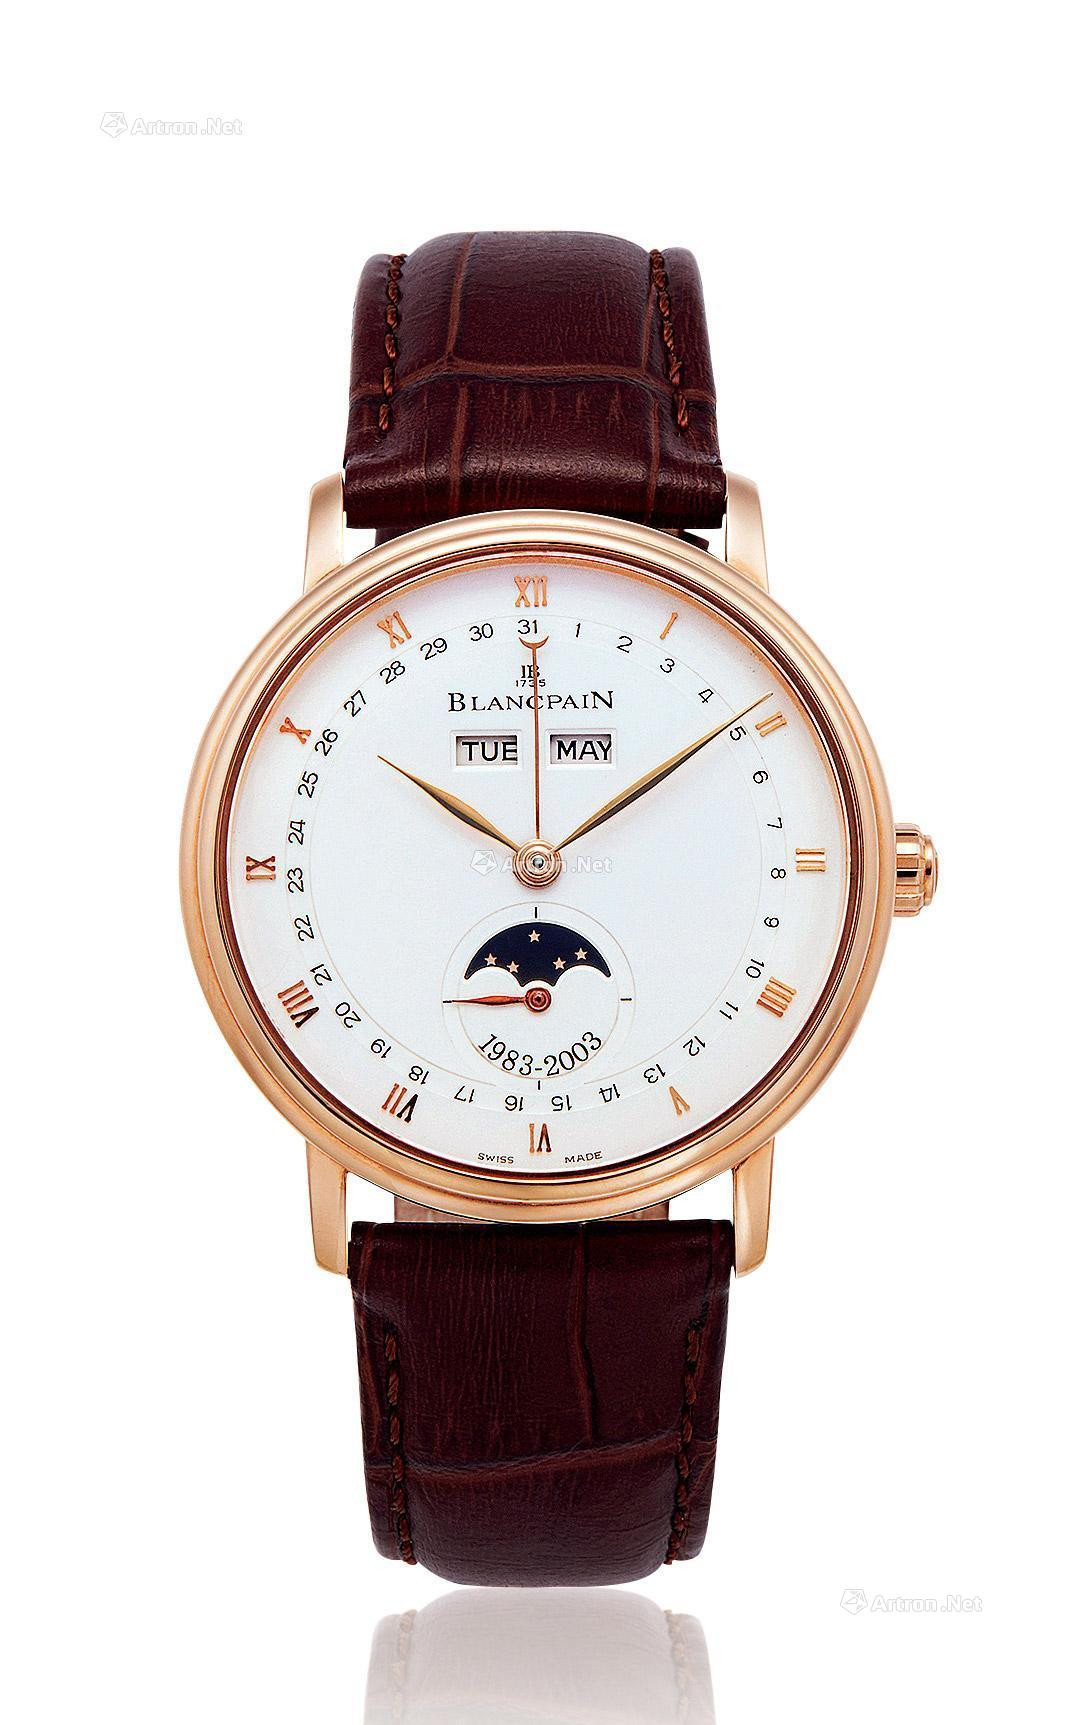 BLANCPAIN A SPECIAL LIMITED ROSE GOLD CALENDAR AUTOMATIC WRISTWATCH WITH MOON-PHASE INDICATION FOR CELEBRATING THE 20TH ANNIVERSARY